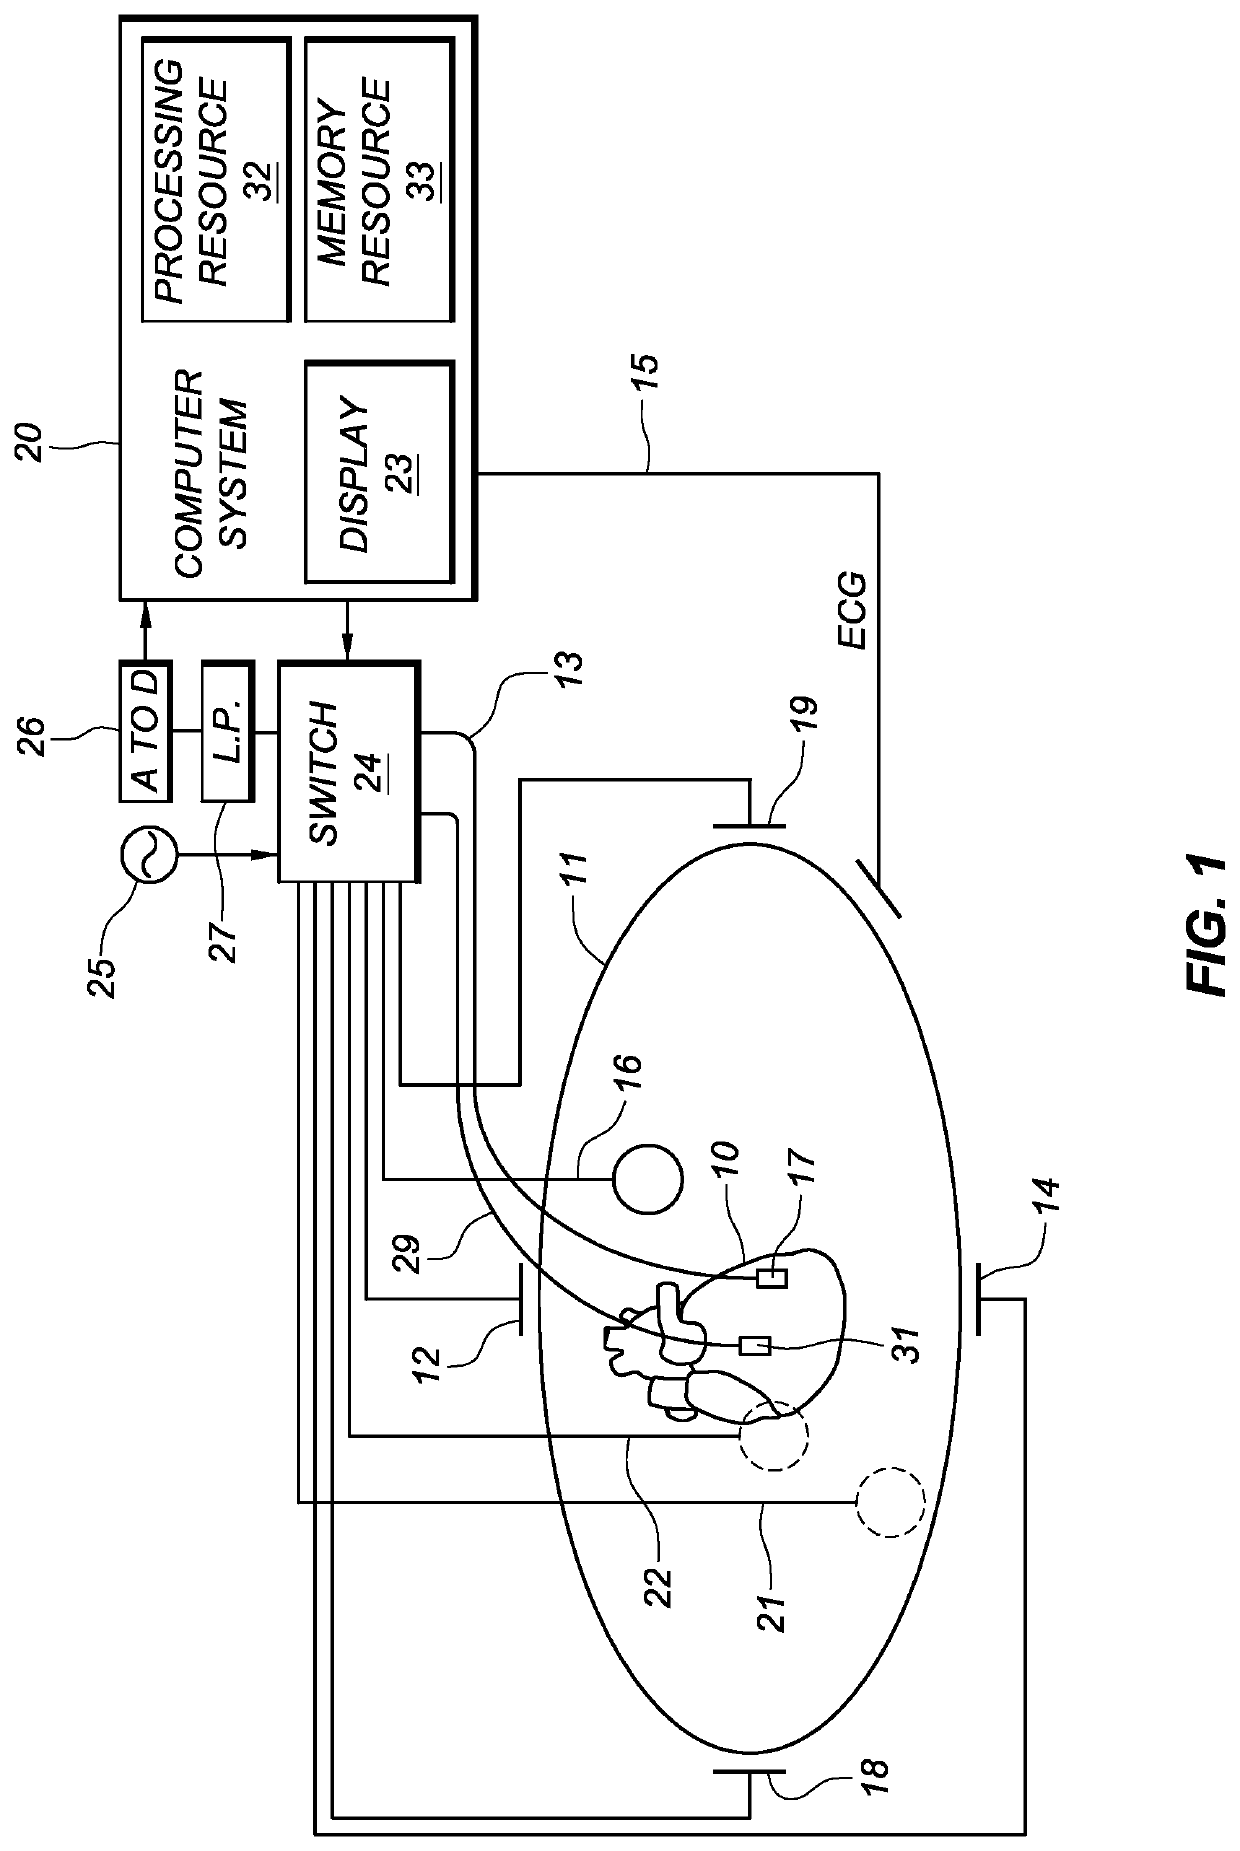 Reliability determination of electrode location data